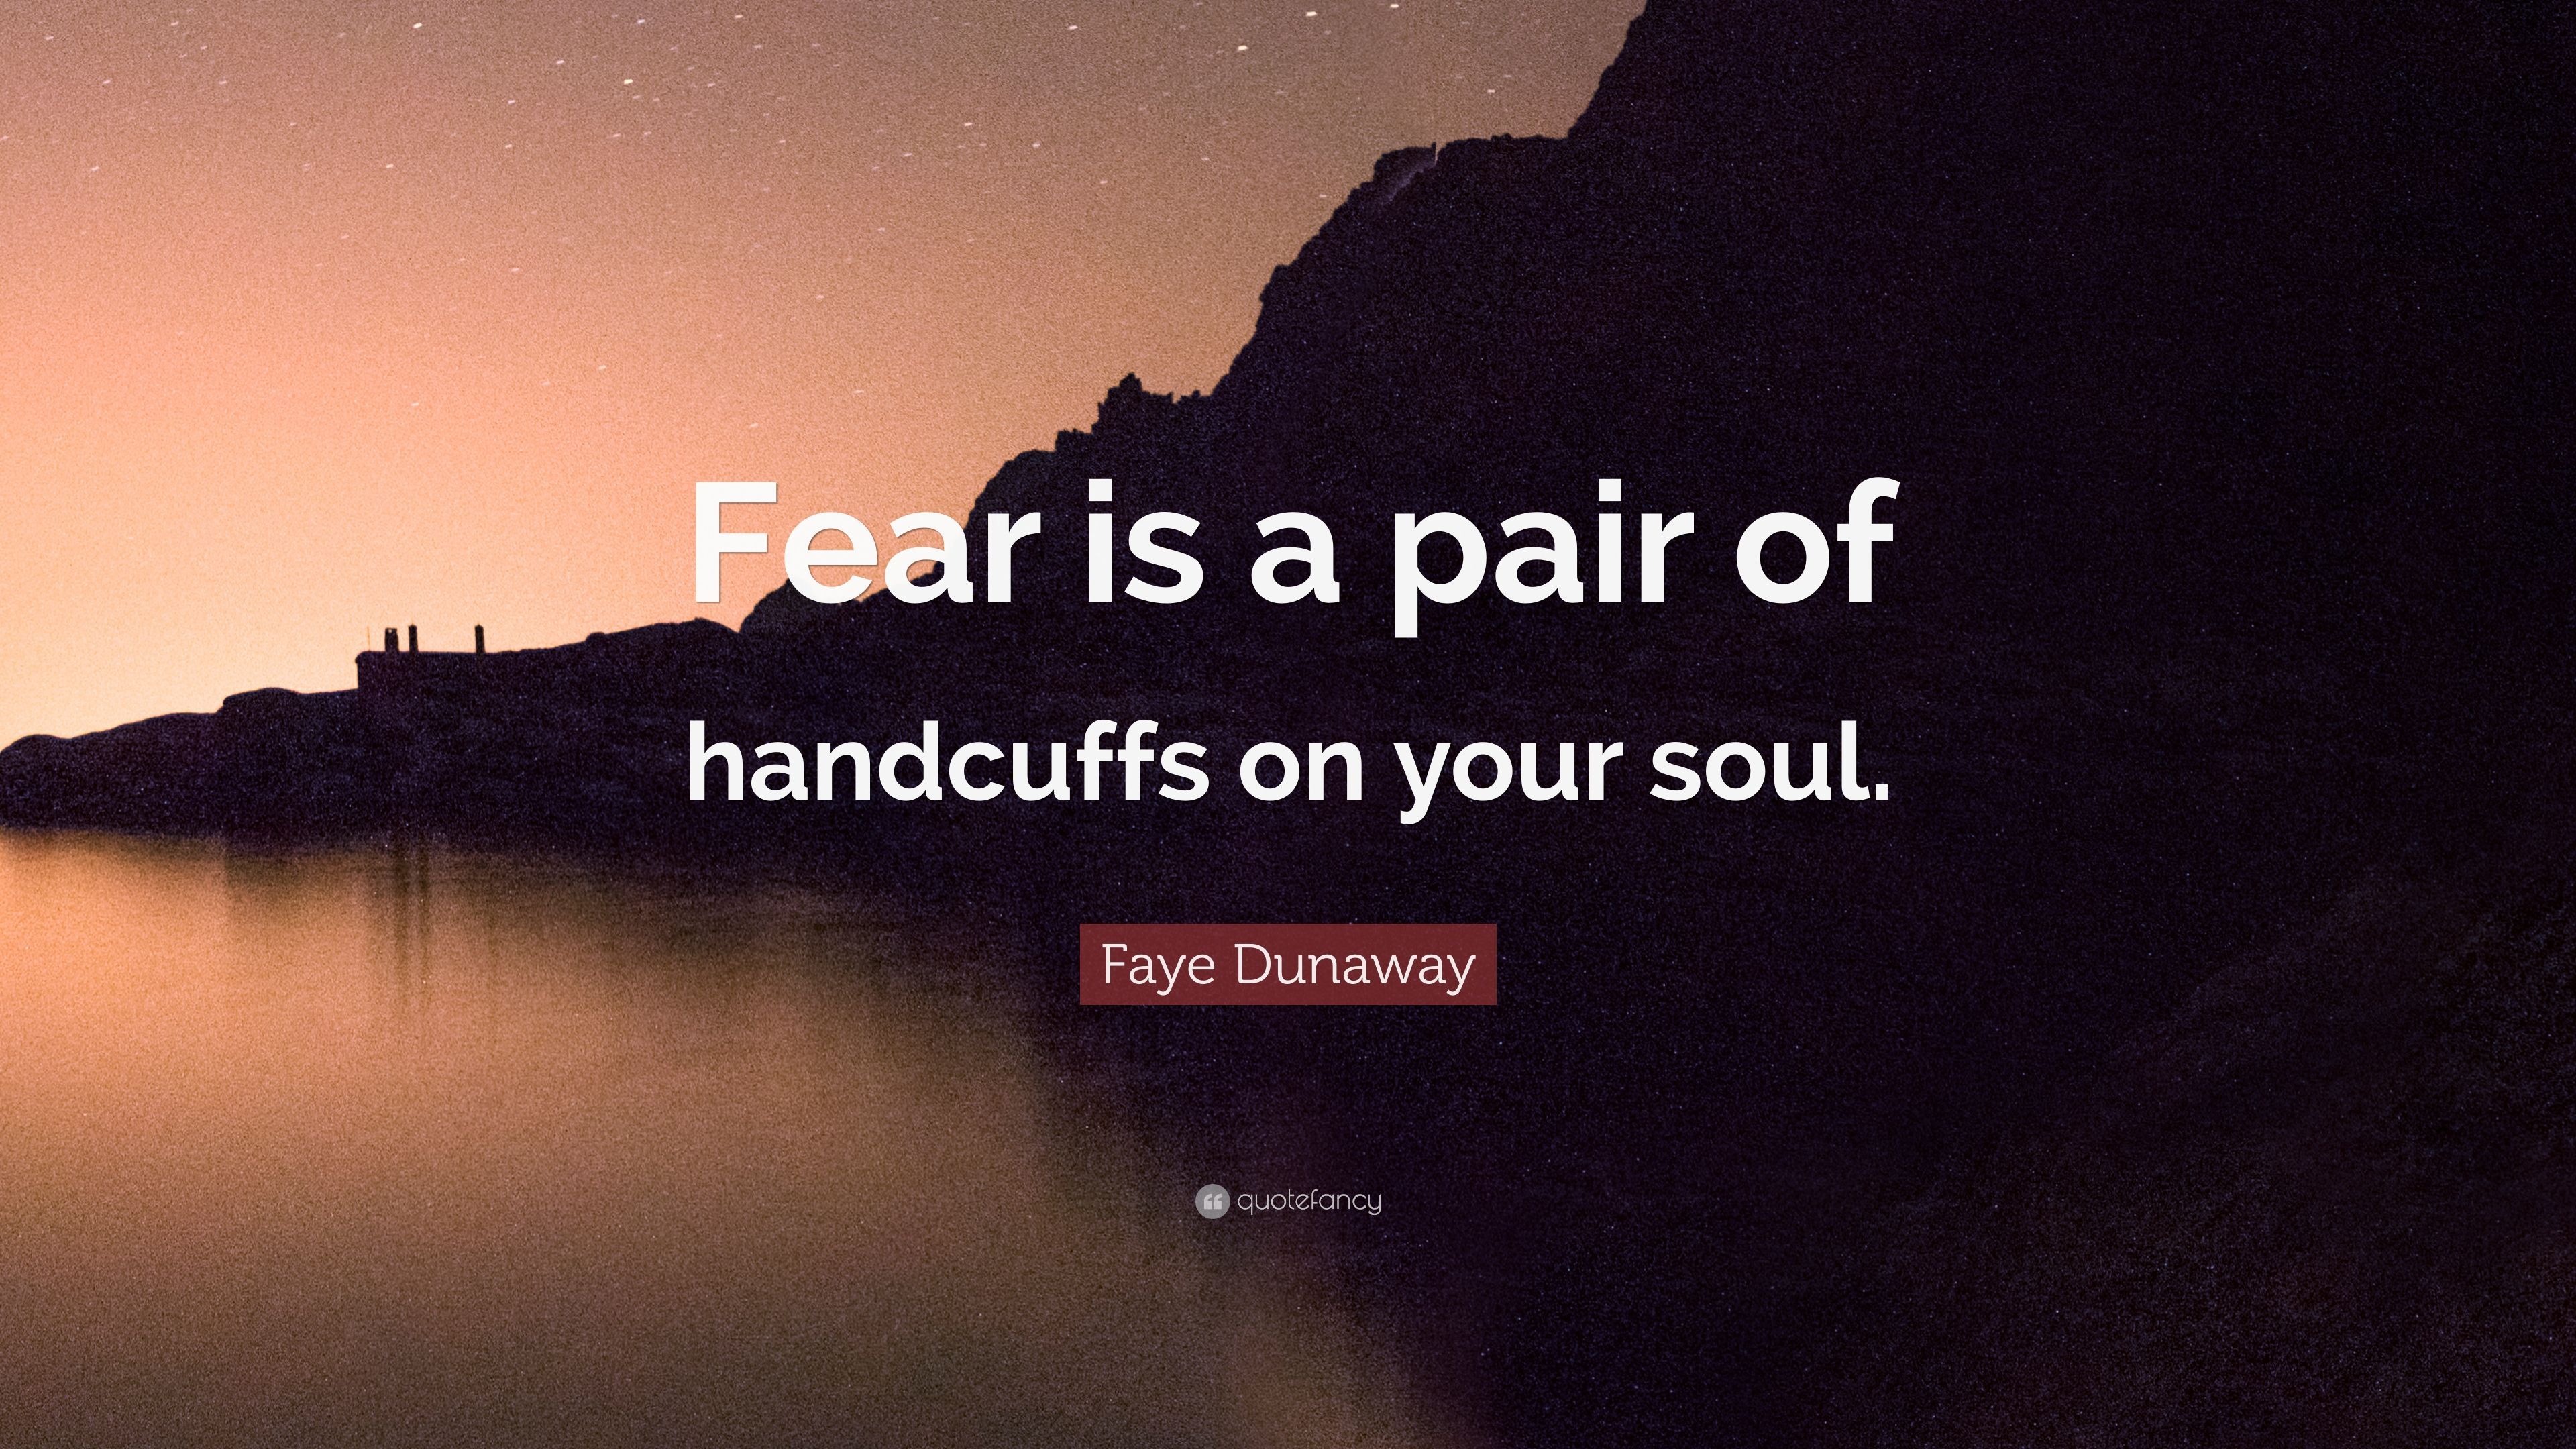 Faye Dunaway Quote: “Fear is a pair of handcuffs on your soul.” 9